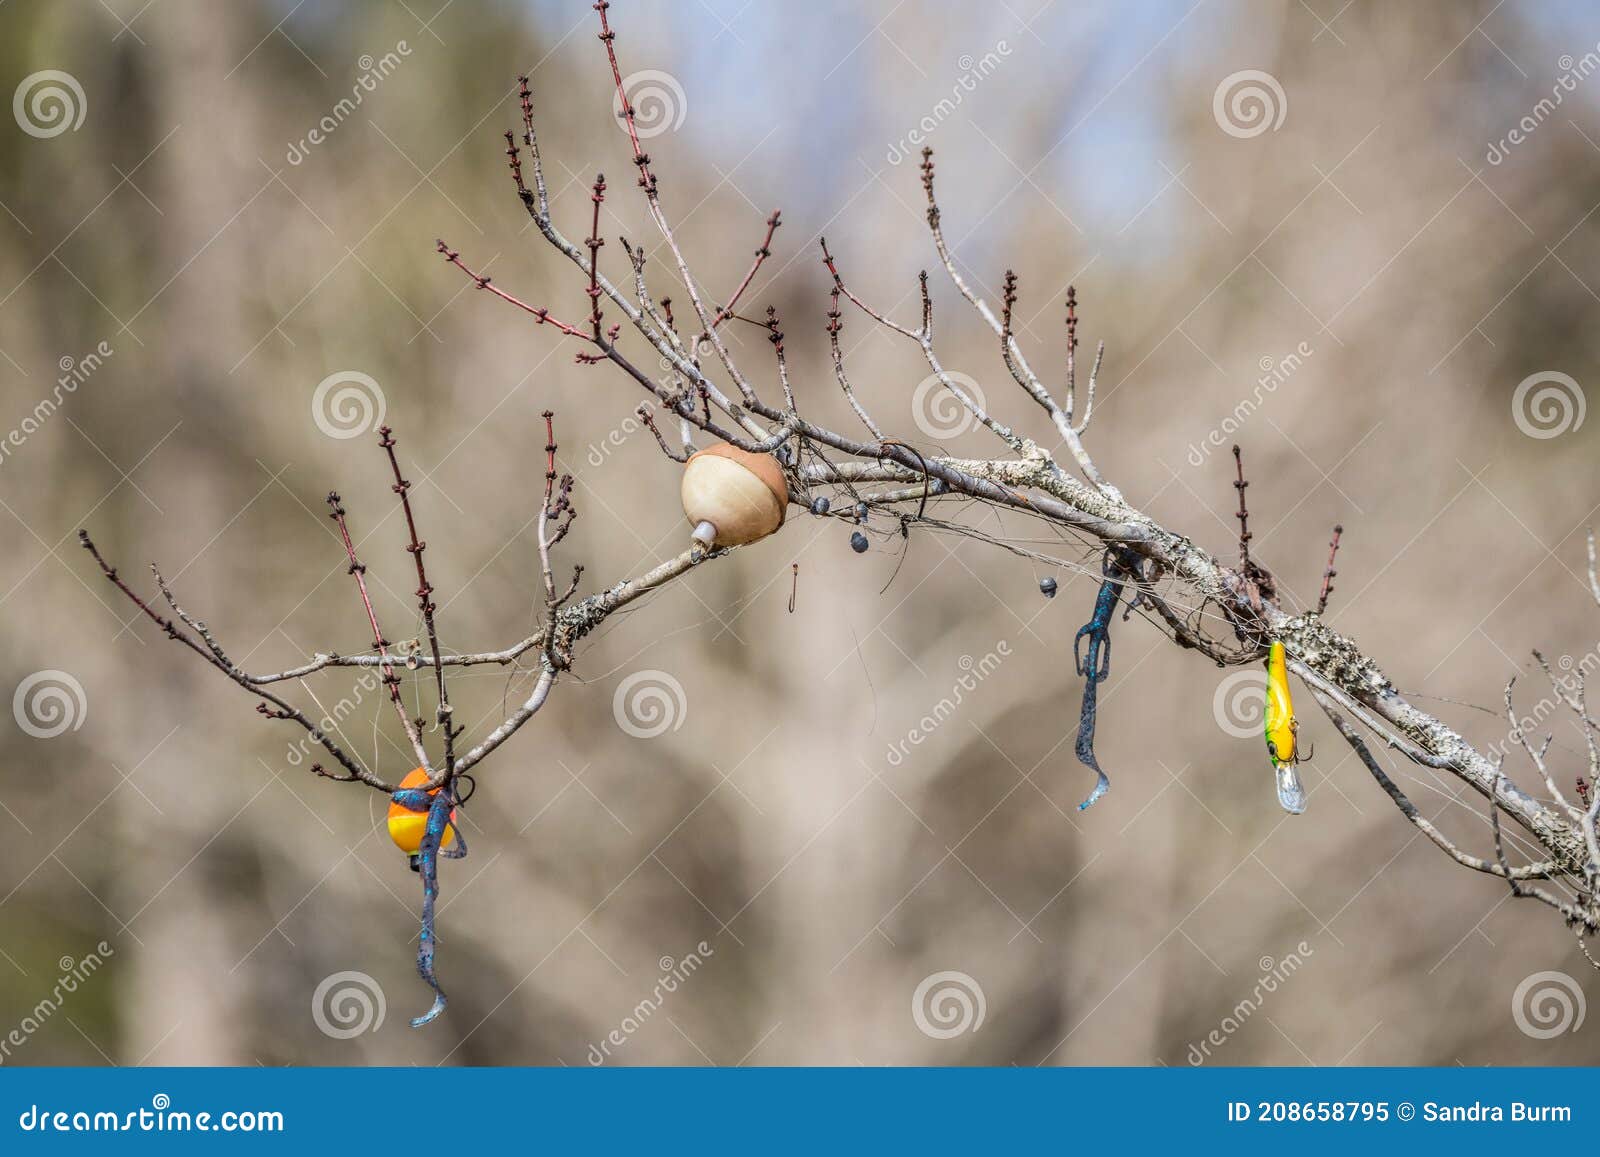 Fishing Lures On A Tree Branch Stock Photo, Picture and Royalty Free Image.  Image 70104470., fishing lure stuck in tree